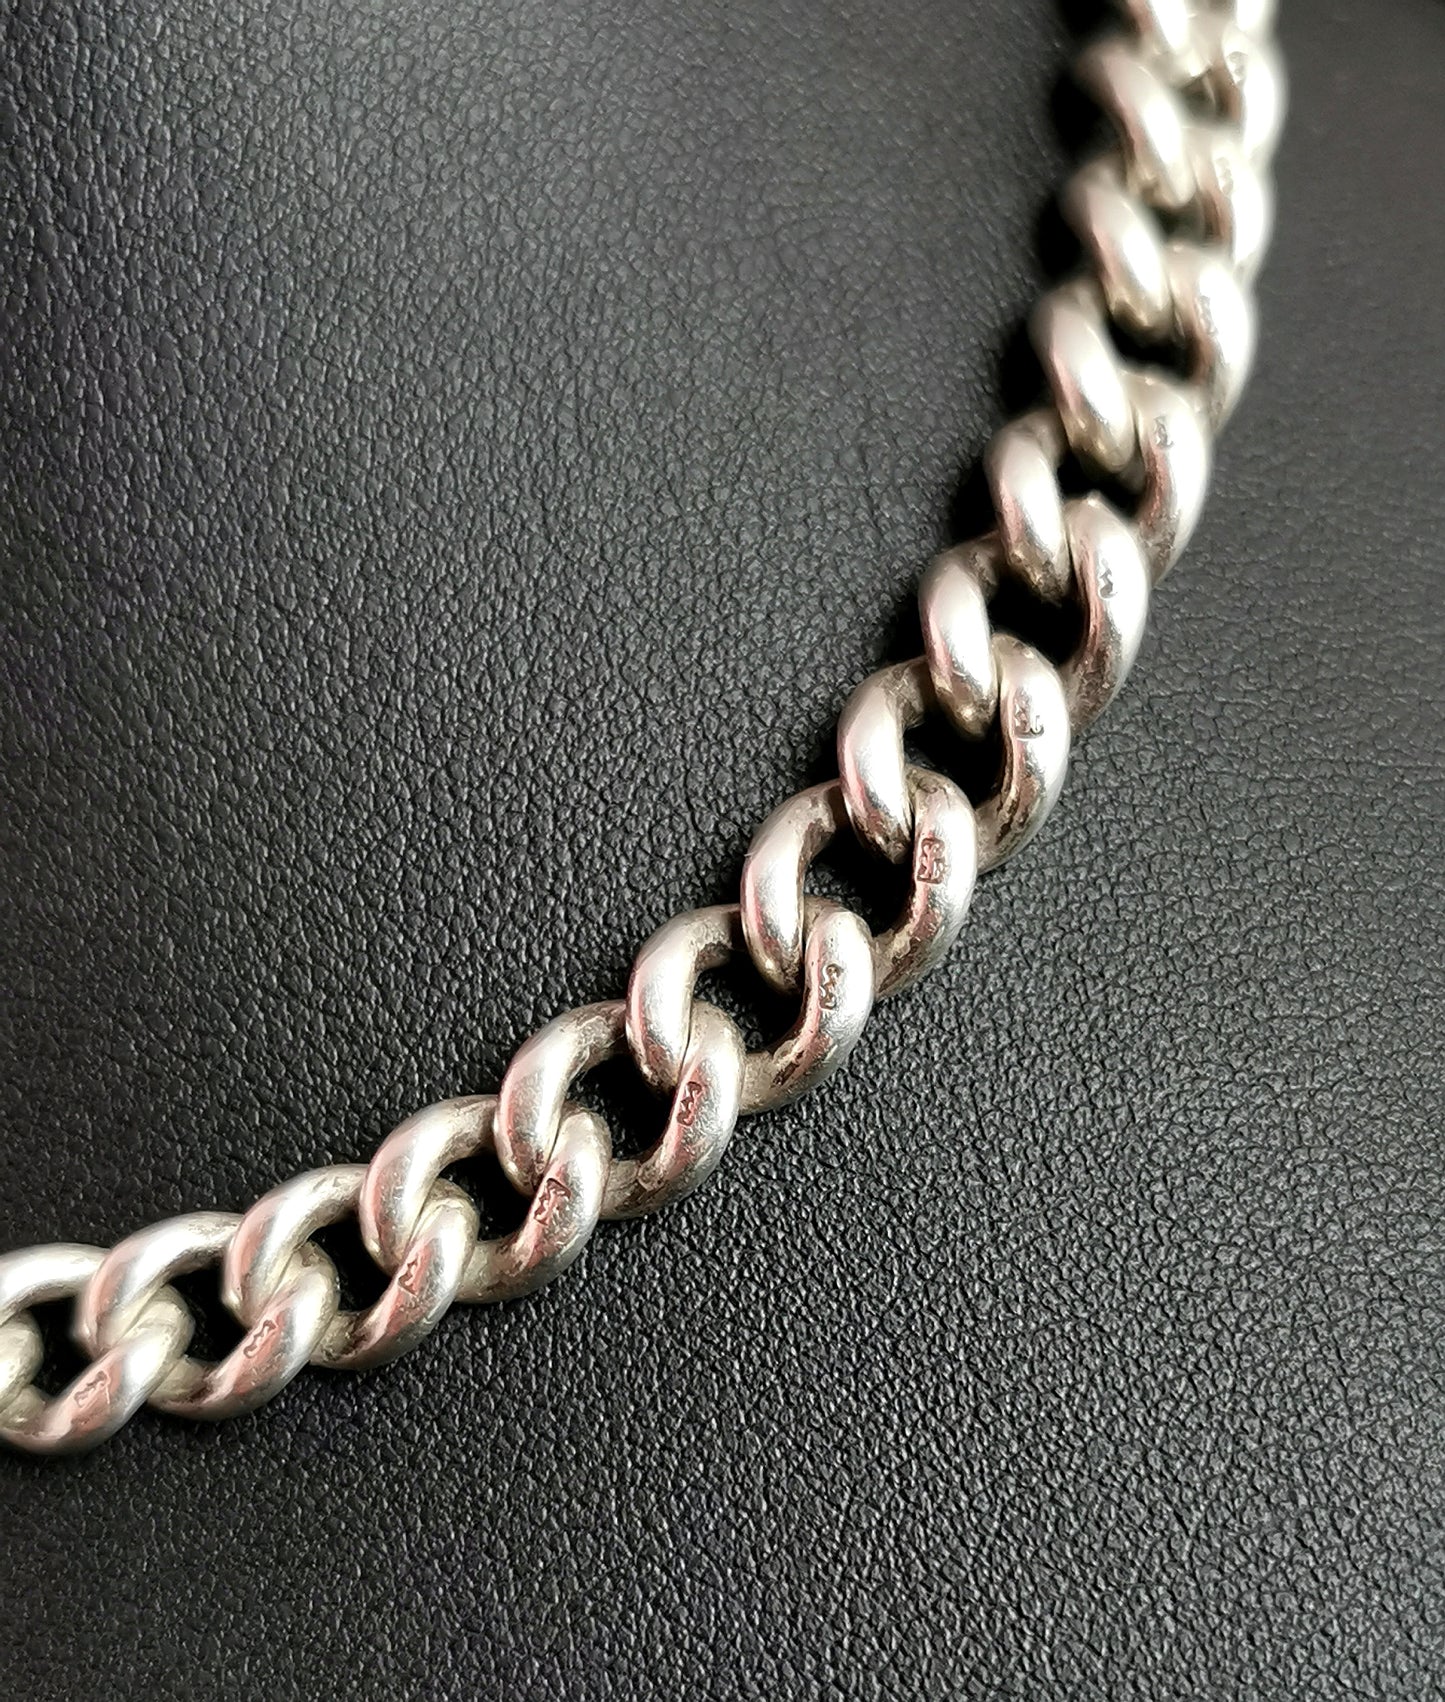 Antique sterling silver Albert chain, watch chain, Curb link